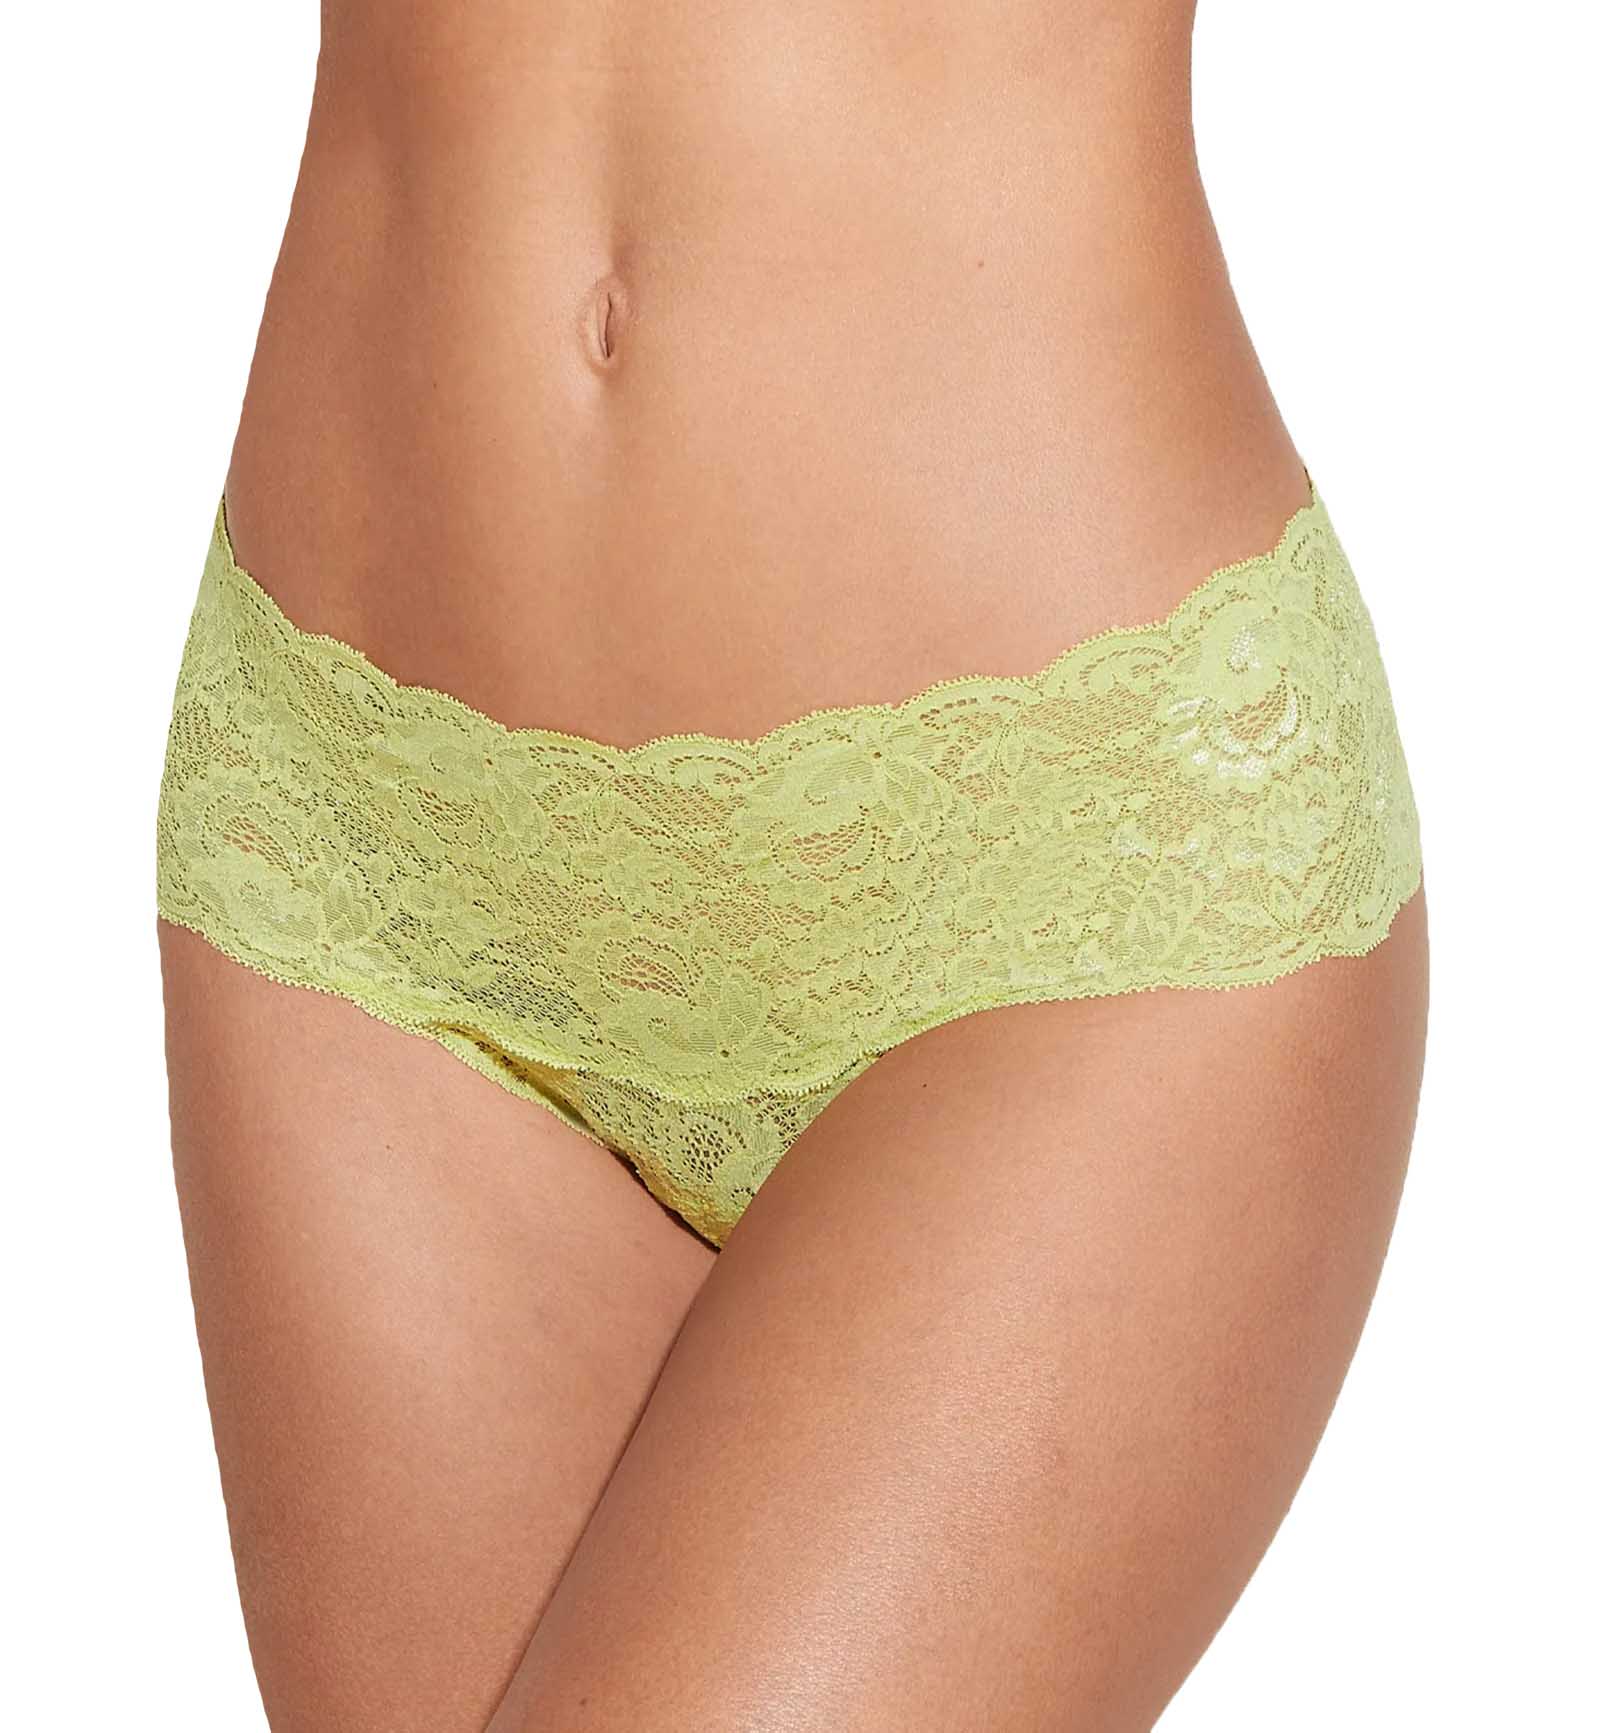 Cosabella Never Say Never Comfie Thong (NEVER0343),S/M,Chakra Green - Chakra Green,S/M